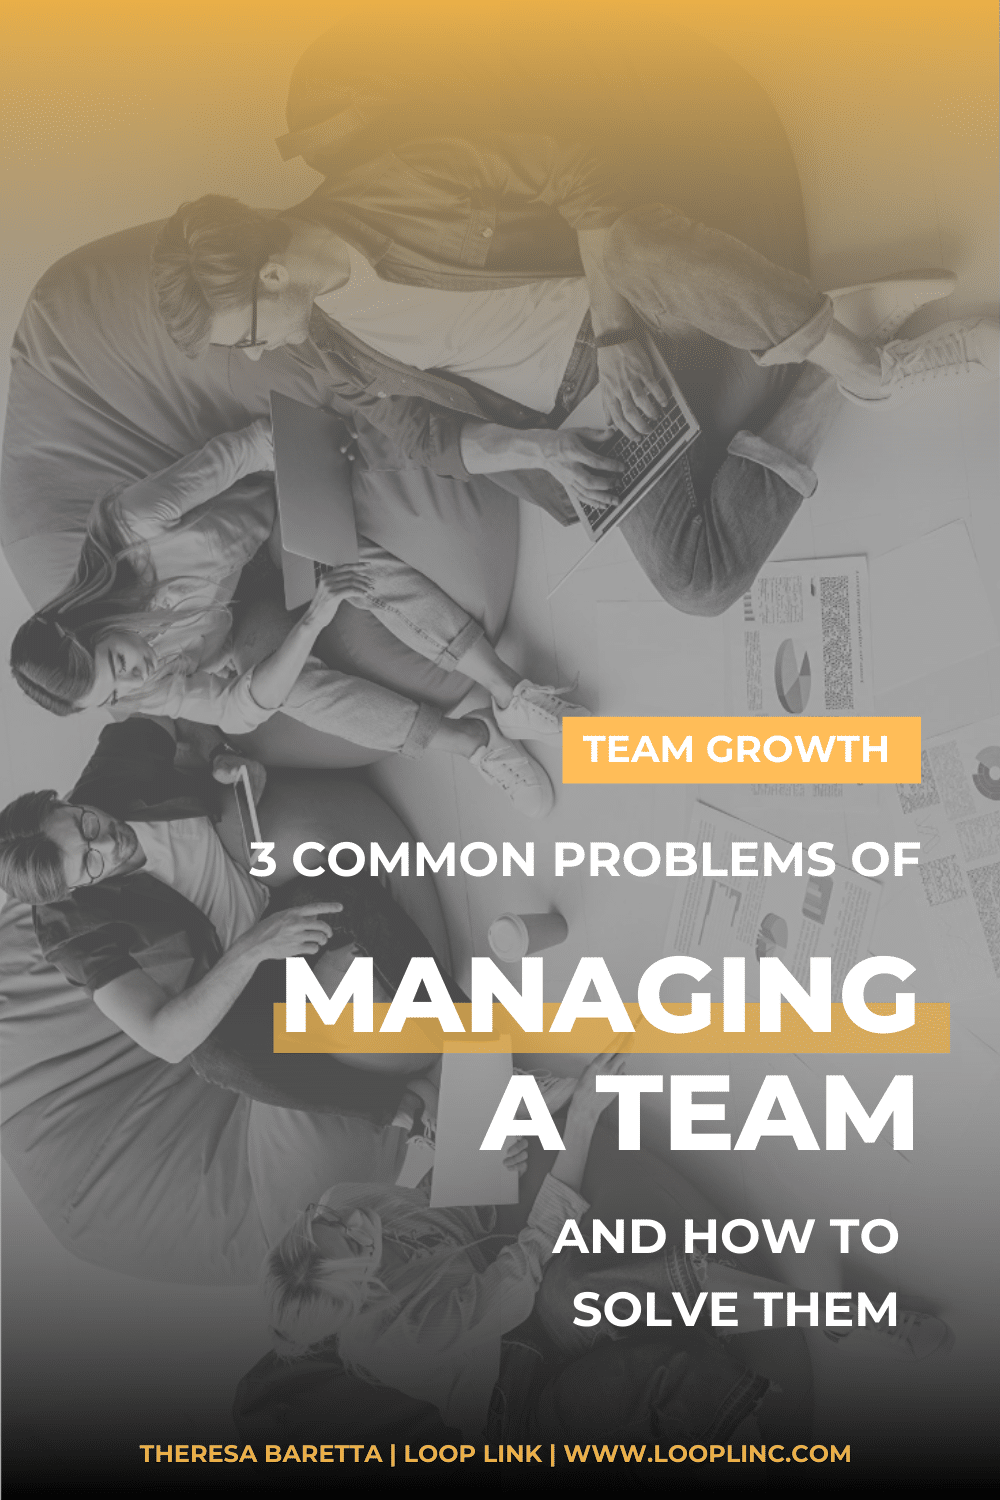 How to Solve the 3 Common Problems when Managing a Team